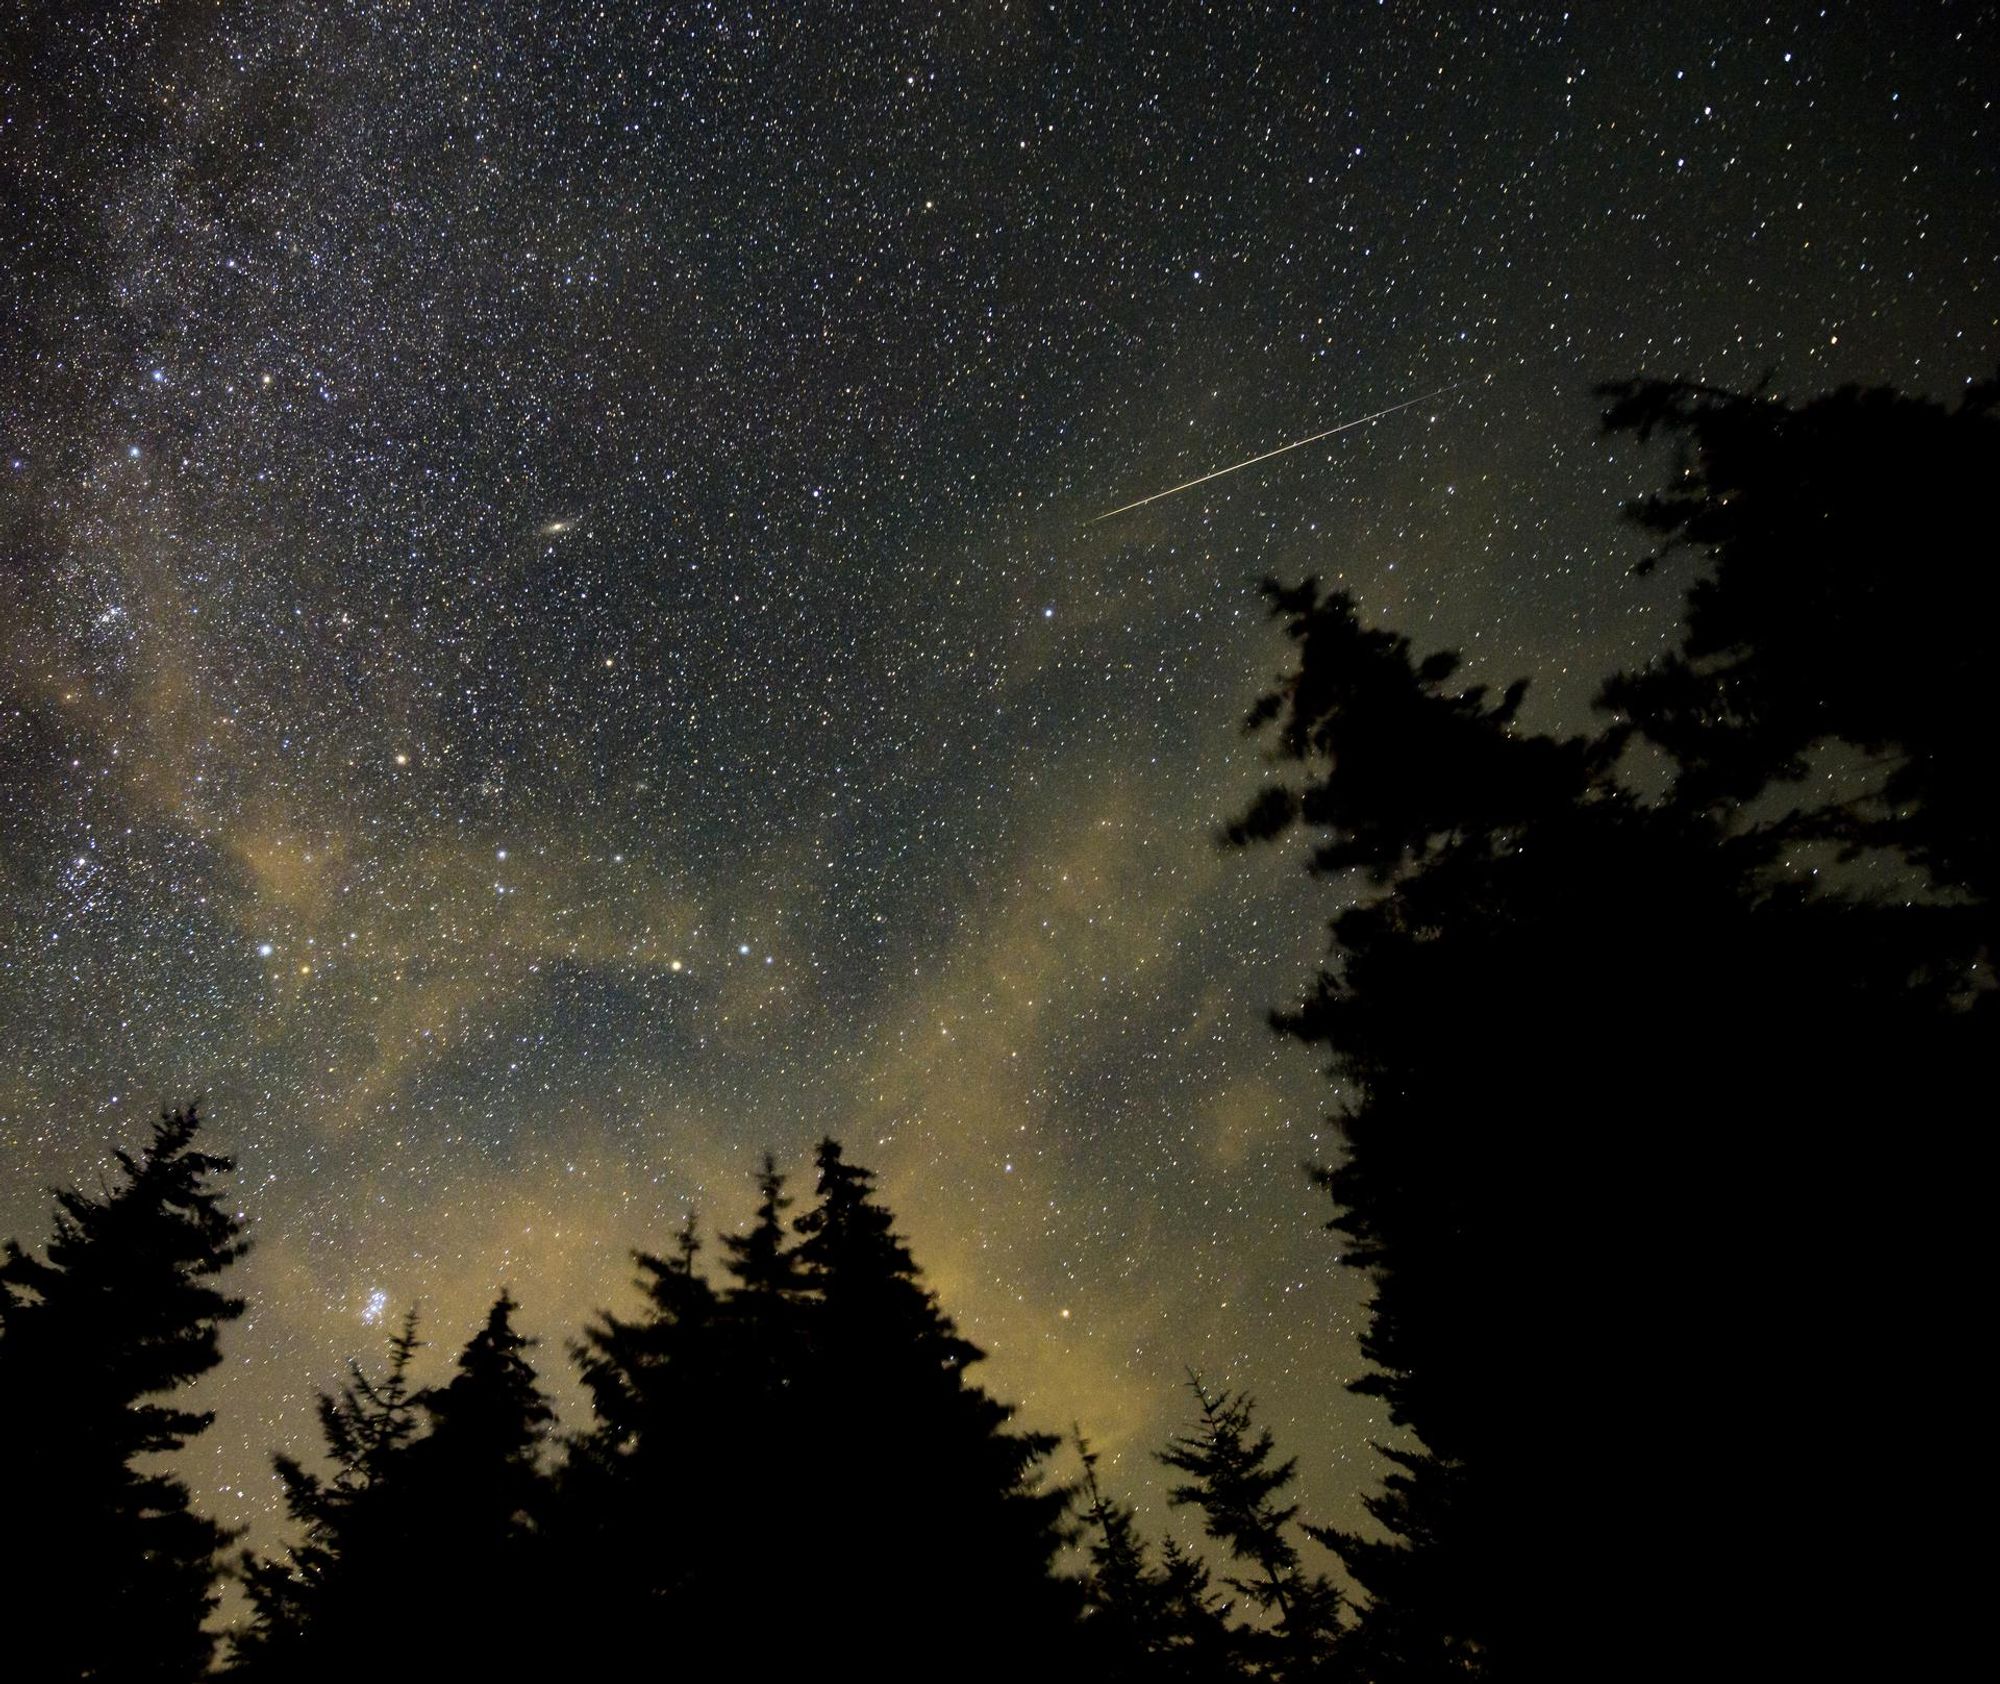 The meteor shower above pine trees